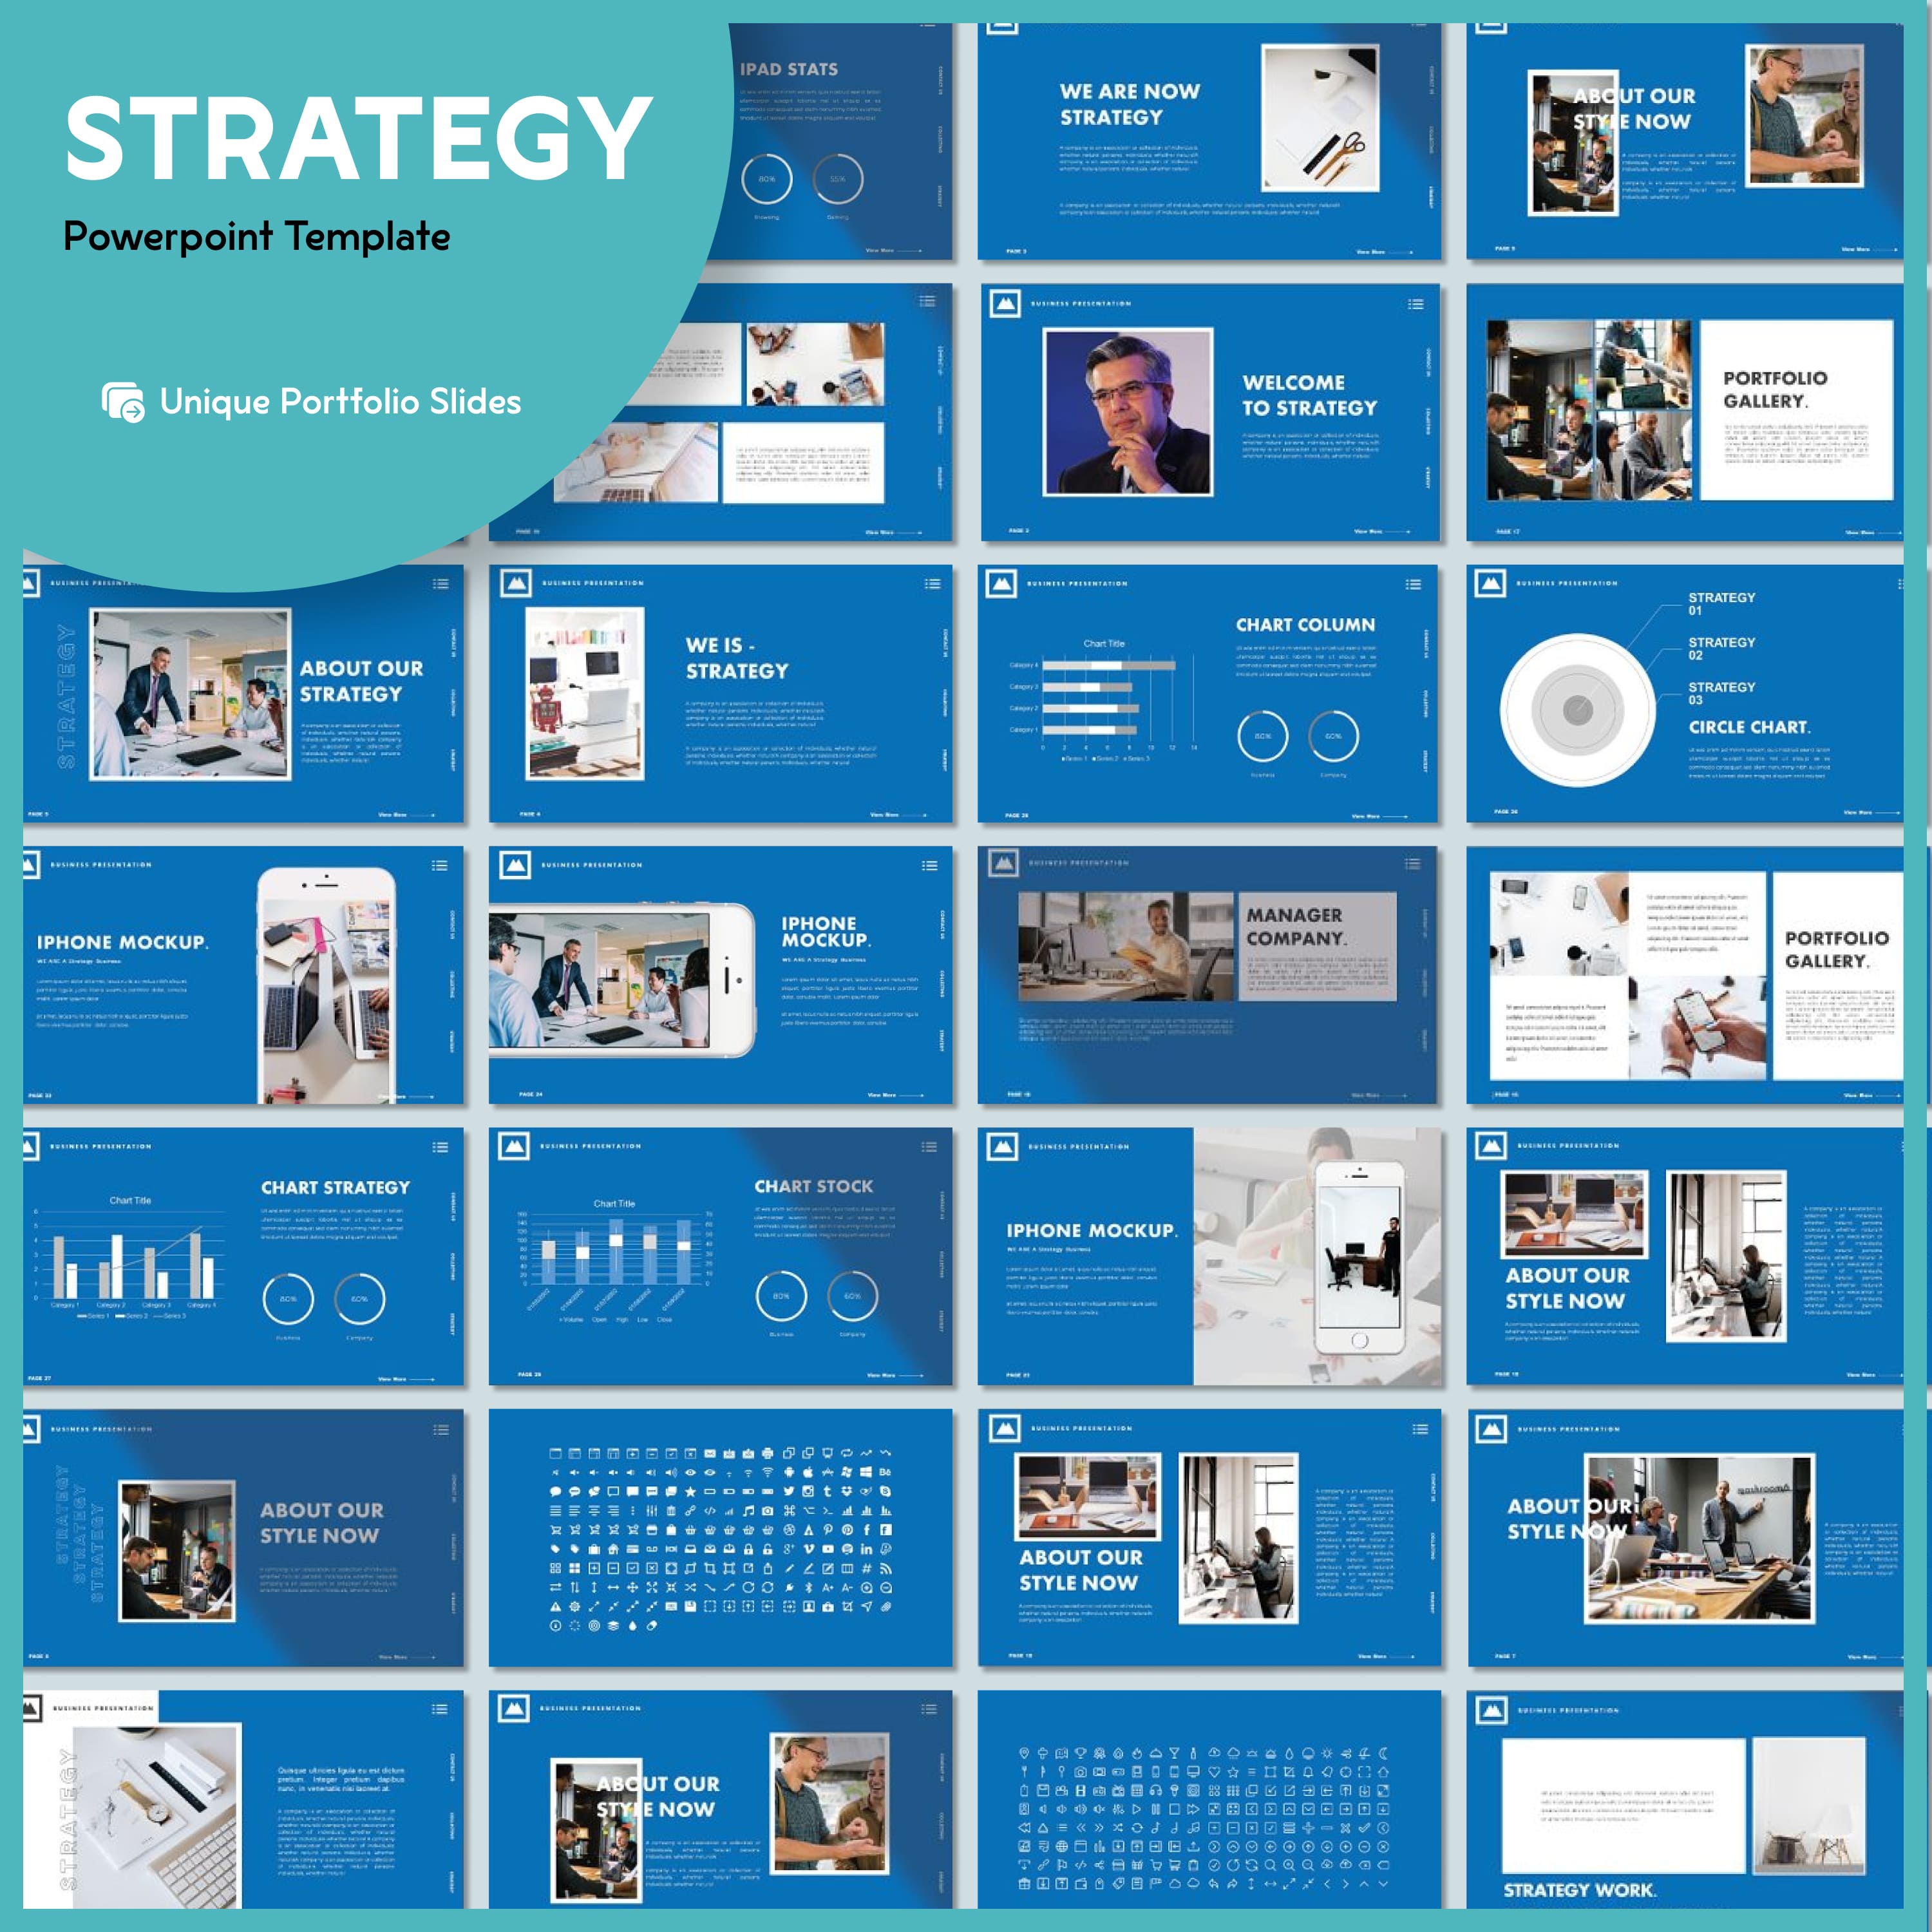 Strategy powerpoint template - main image preview.